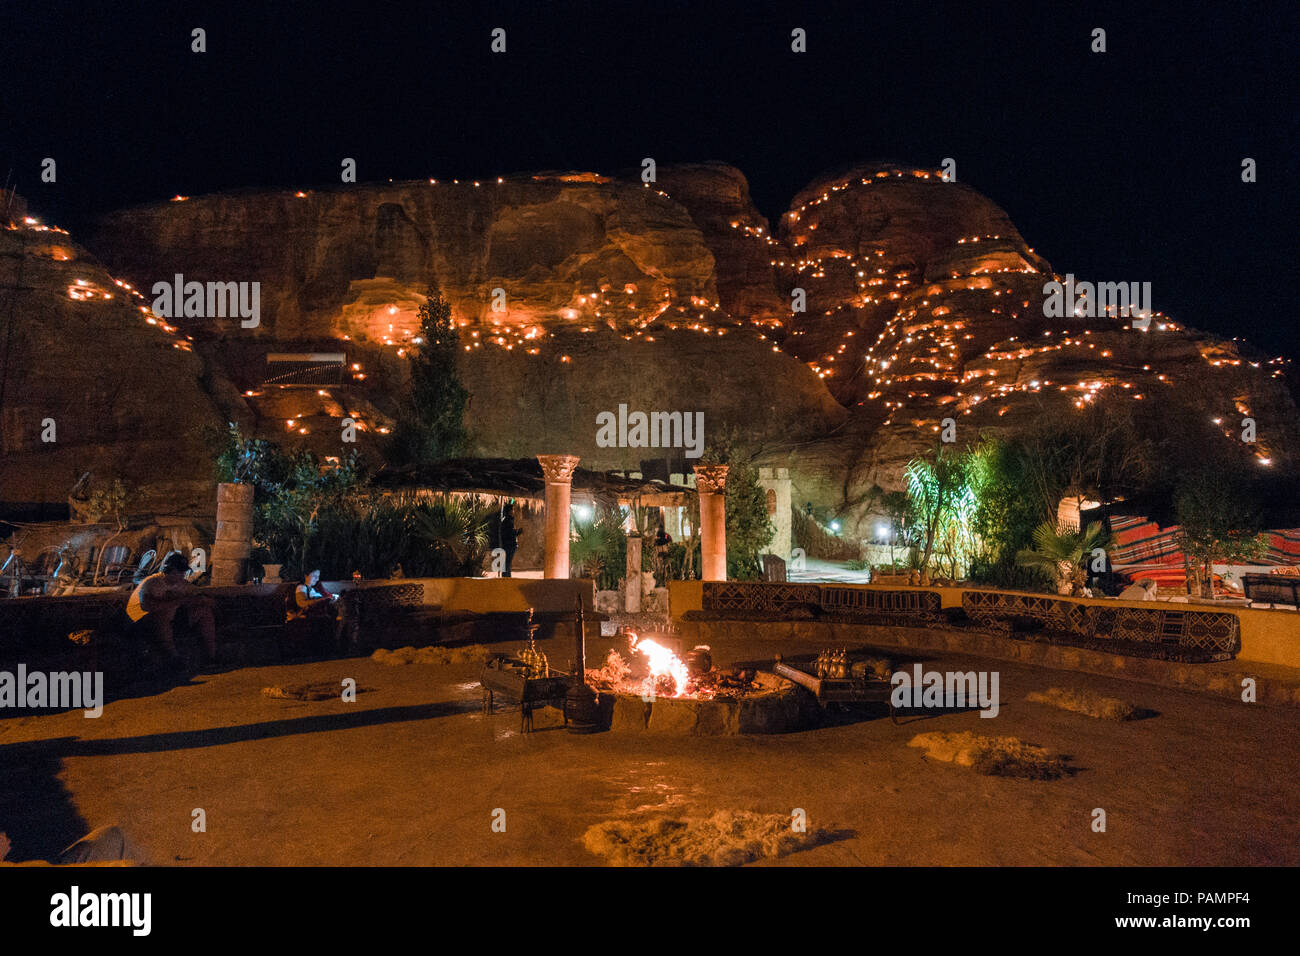 the view at night over the common area of a tourist Bedouin camp in Wadi Musa, near Petra, Jordan Stock Photo